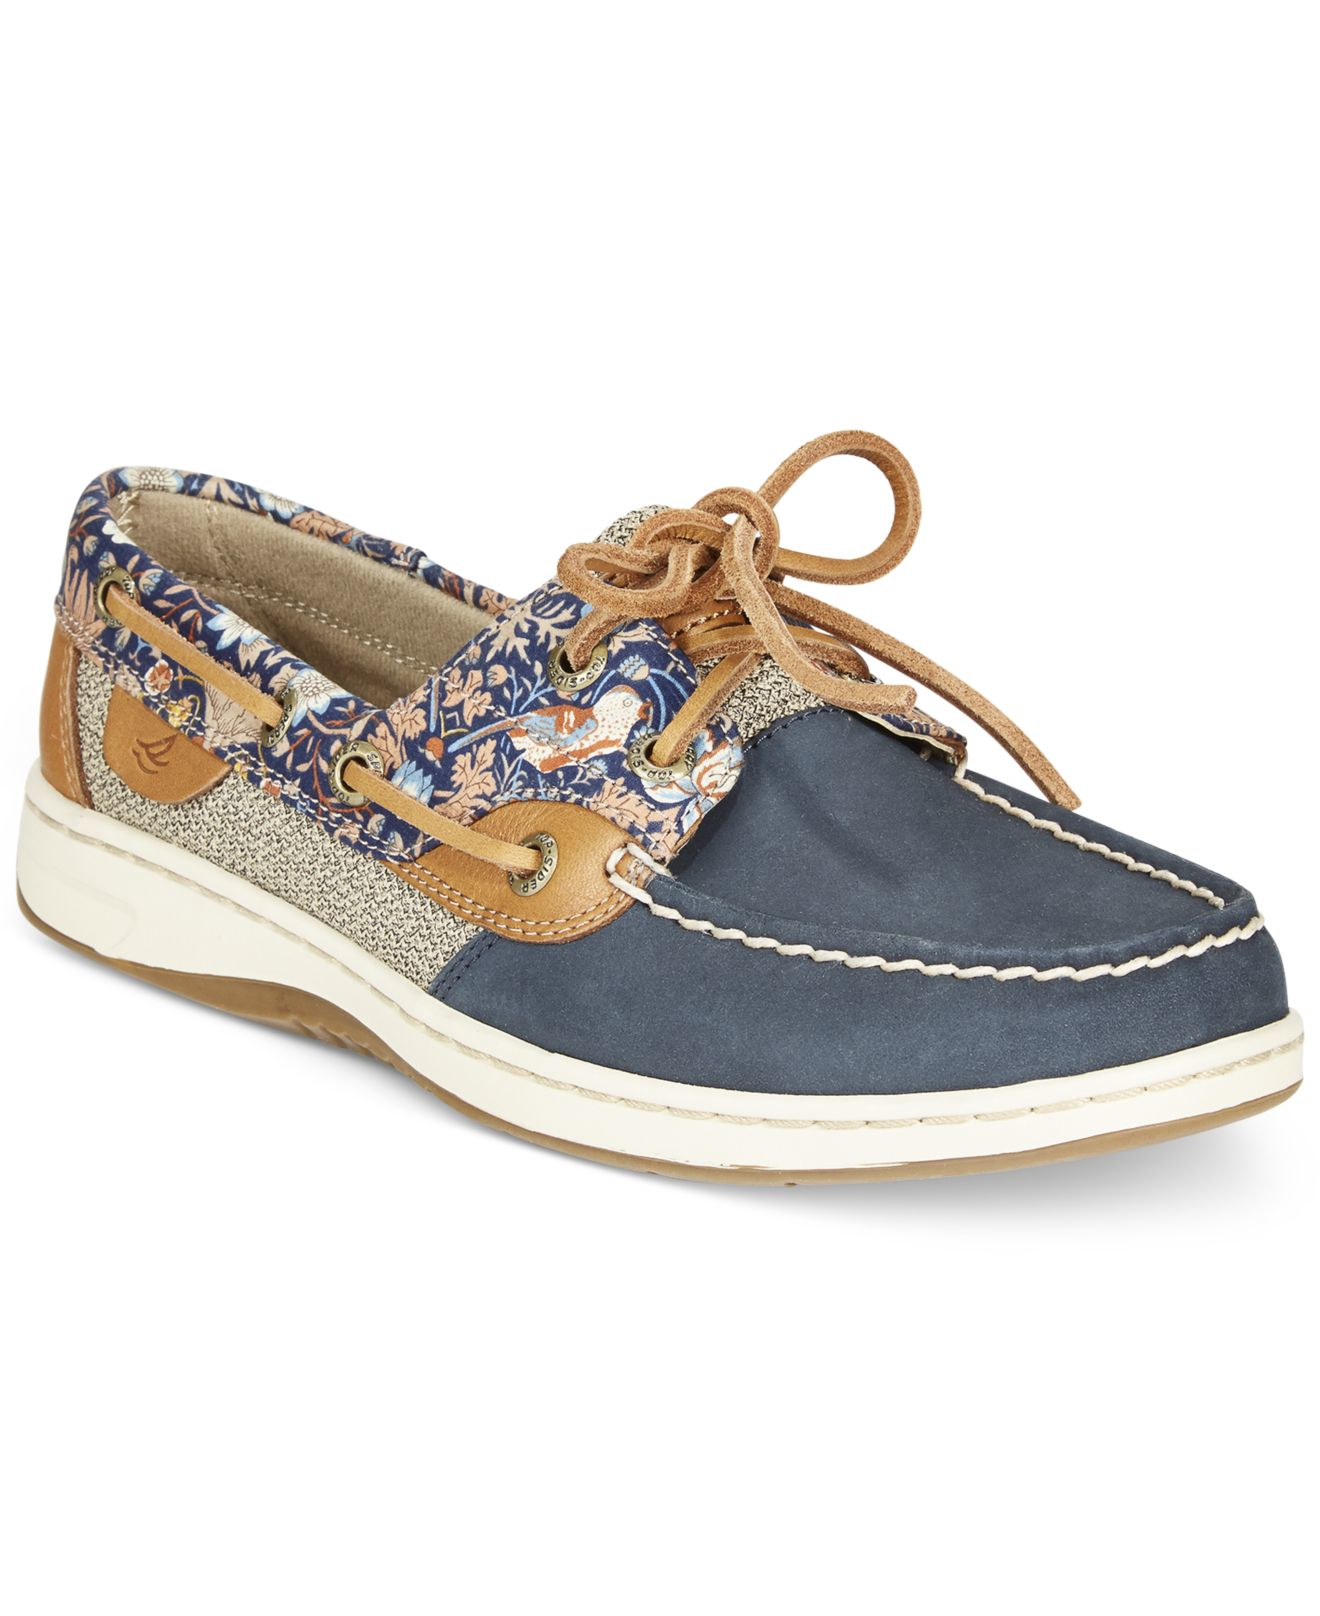 Sperry Top-Sider Women's Bluefish Linen Oat Boat Shoes in Navy (Brown ...